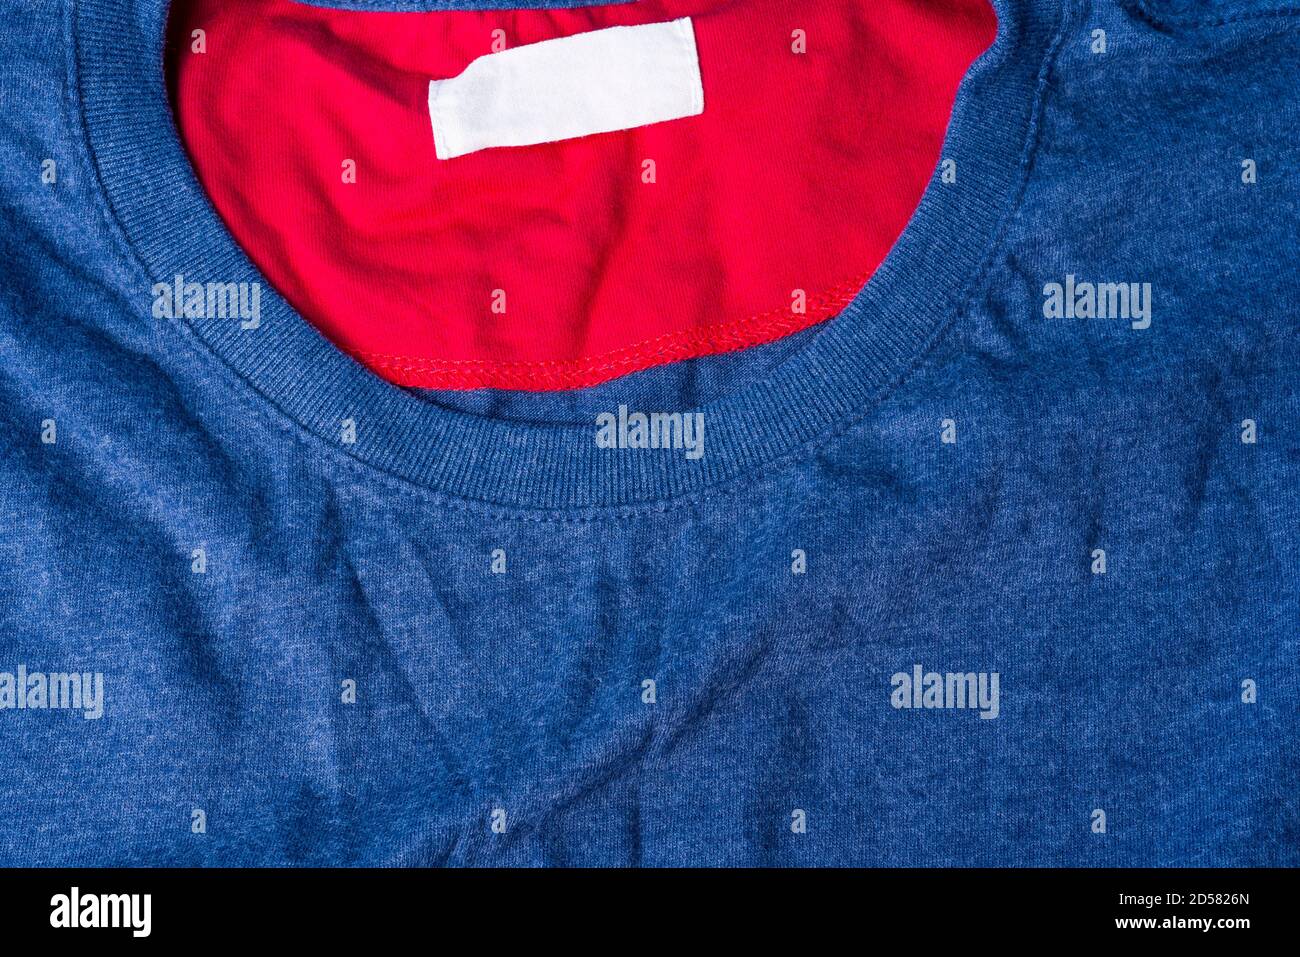 Dark blue plain cotton t-shirt. a stylish shirt with a round collar and red lining. Stock Photo